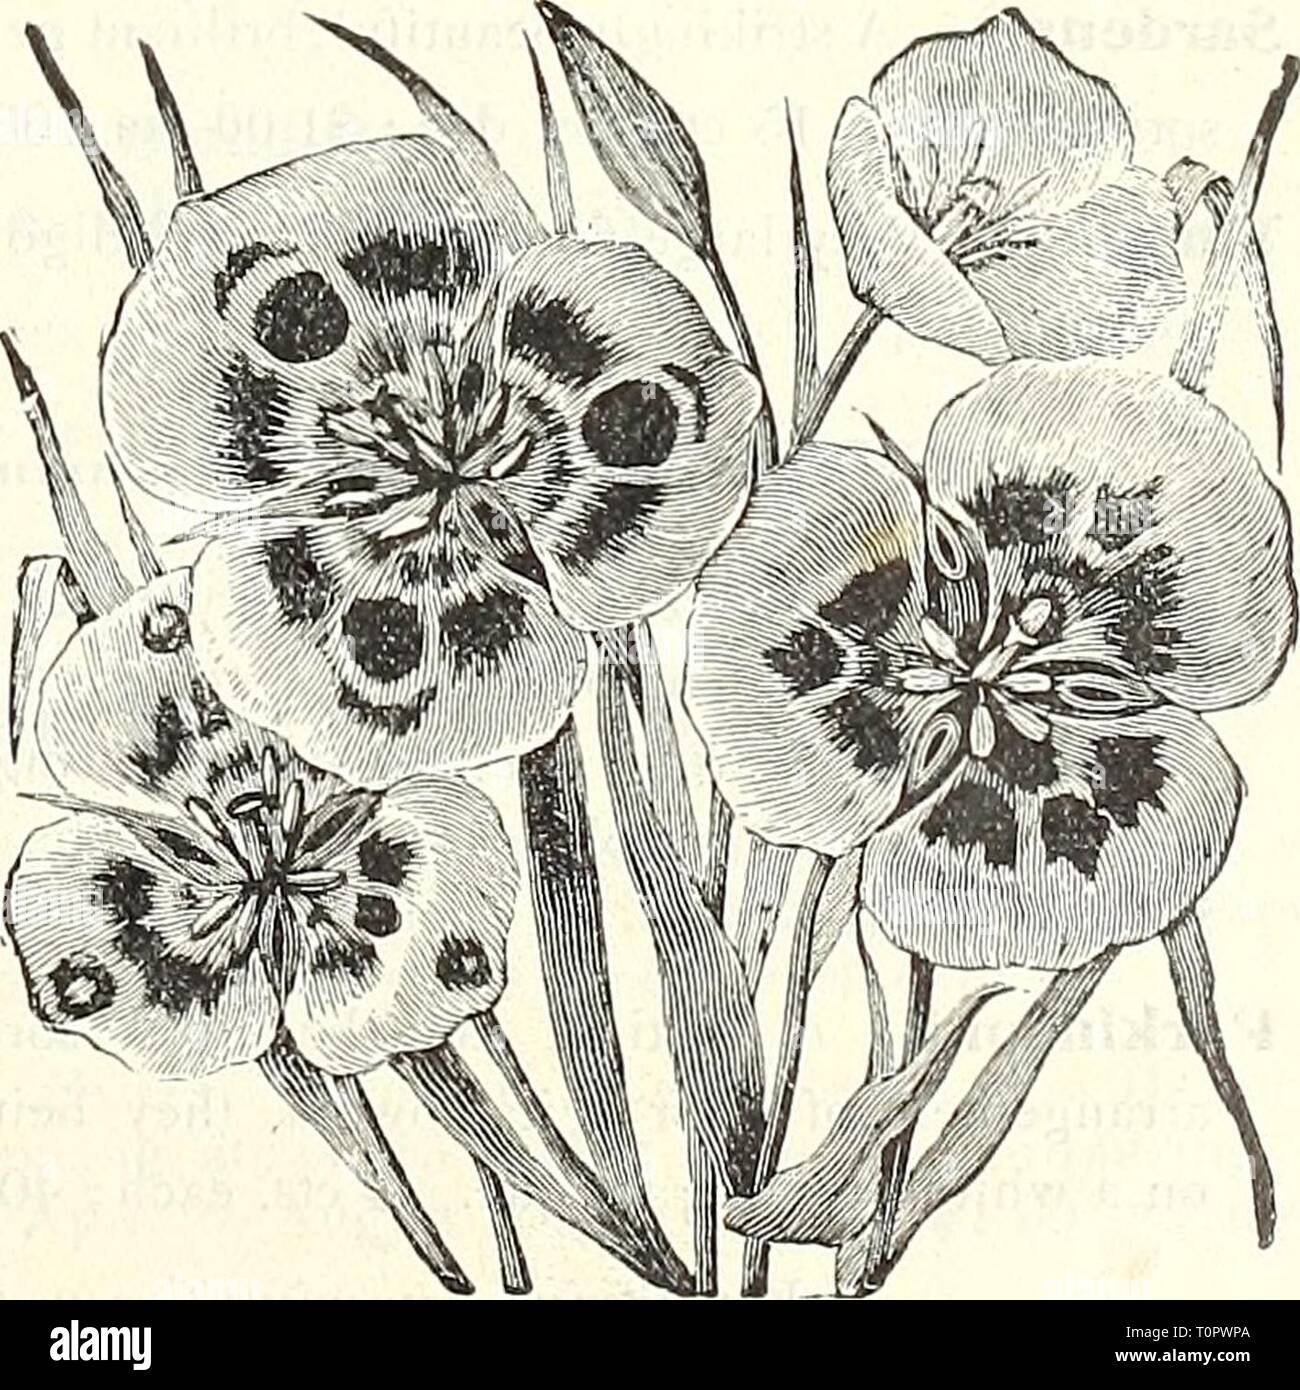 Dreer's autumn catalogue 1905 (1905) Dreer's autumn catalogue 1905  dreersautumncata1905henr Year: 1905  Double Anemones. Handsome bulbous plants from the Pacific Slope, blooming in pendent clusier-i on long, slender stems. It is easily forced, and may be grown in the greenhouse or cold frame, or if planted out in clumps or masses will flower freely in June or July. Perfectly hardy. Coccinea [Floi-nl Firecracker). Flowers  to 2 inches long ; a rich glowing crimson, tipped with pea-green ; a striking plant. (See cut.) 4 cts. each ; 40 Cts. per doz ; |3.00 per 100. nixed Varieties. In many bea Stock Photo